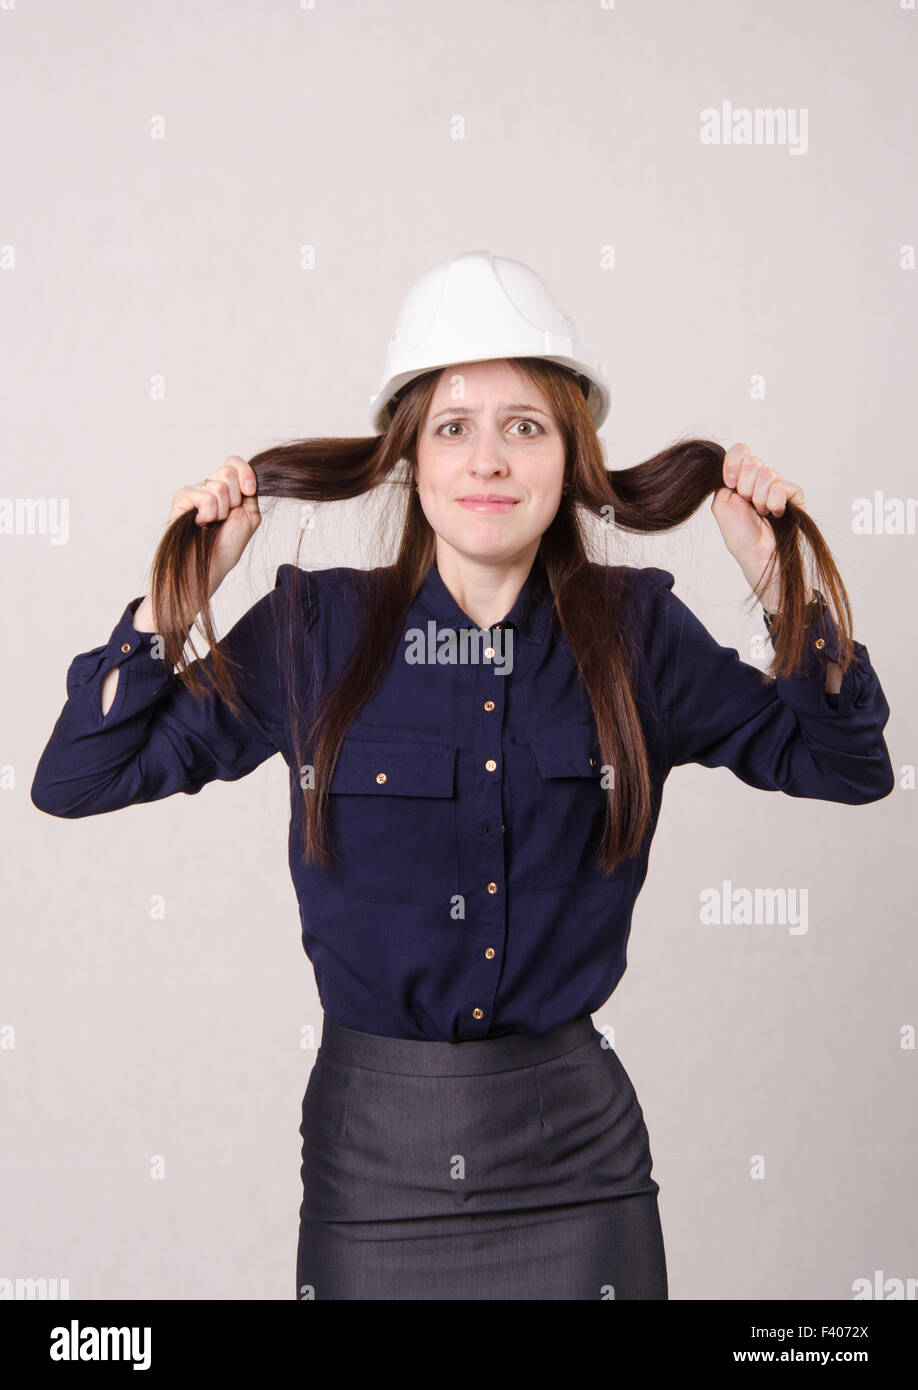 Young girl in shock clutching her hair Stock Photo